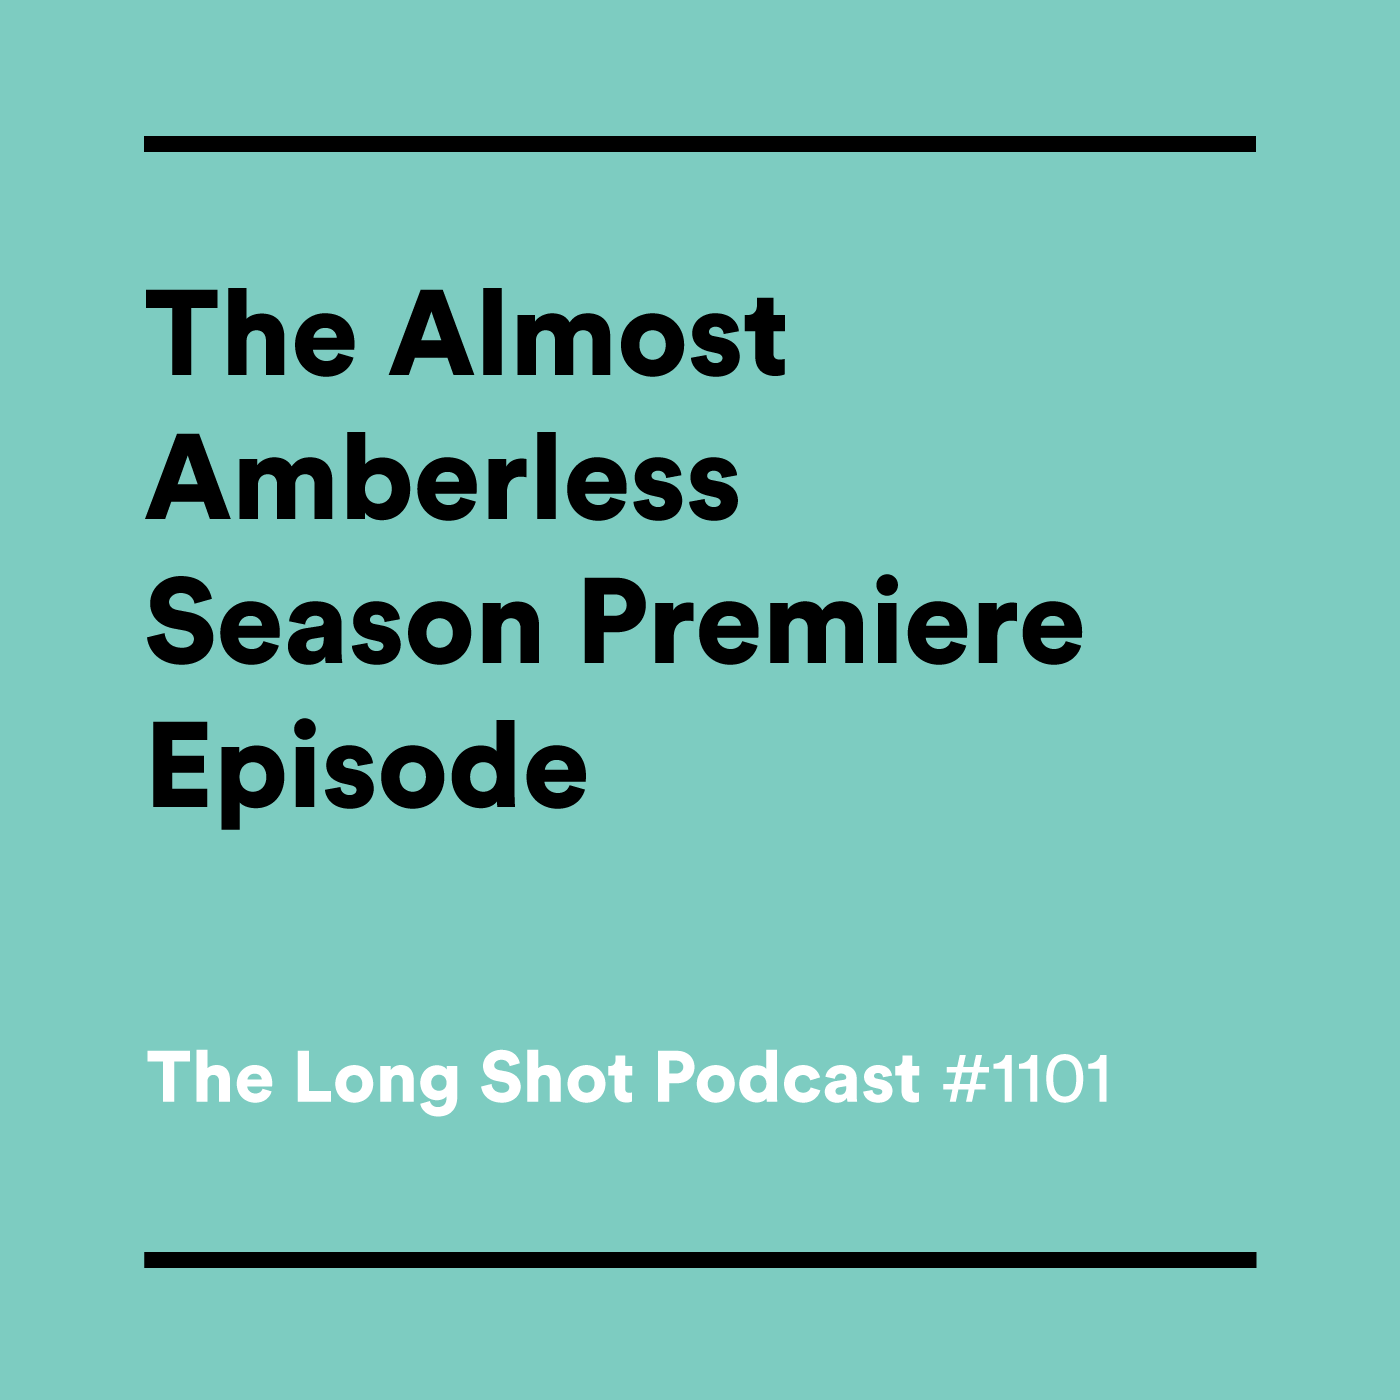 #1101 The Almost Amberless Season Premiere Episode